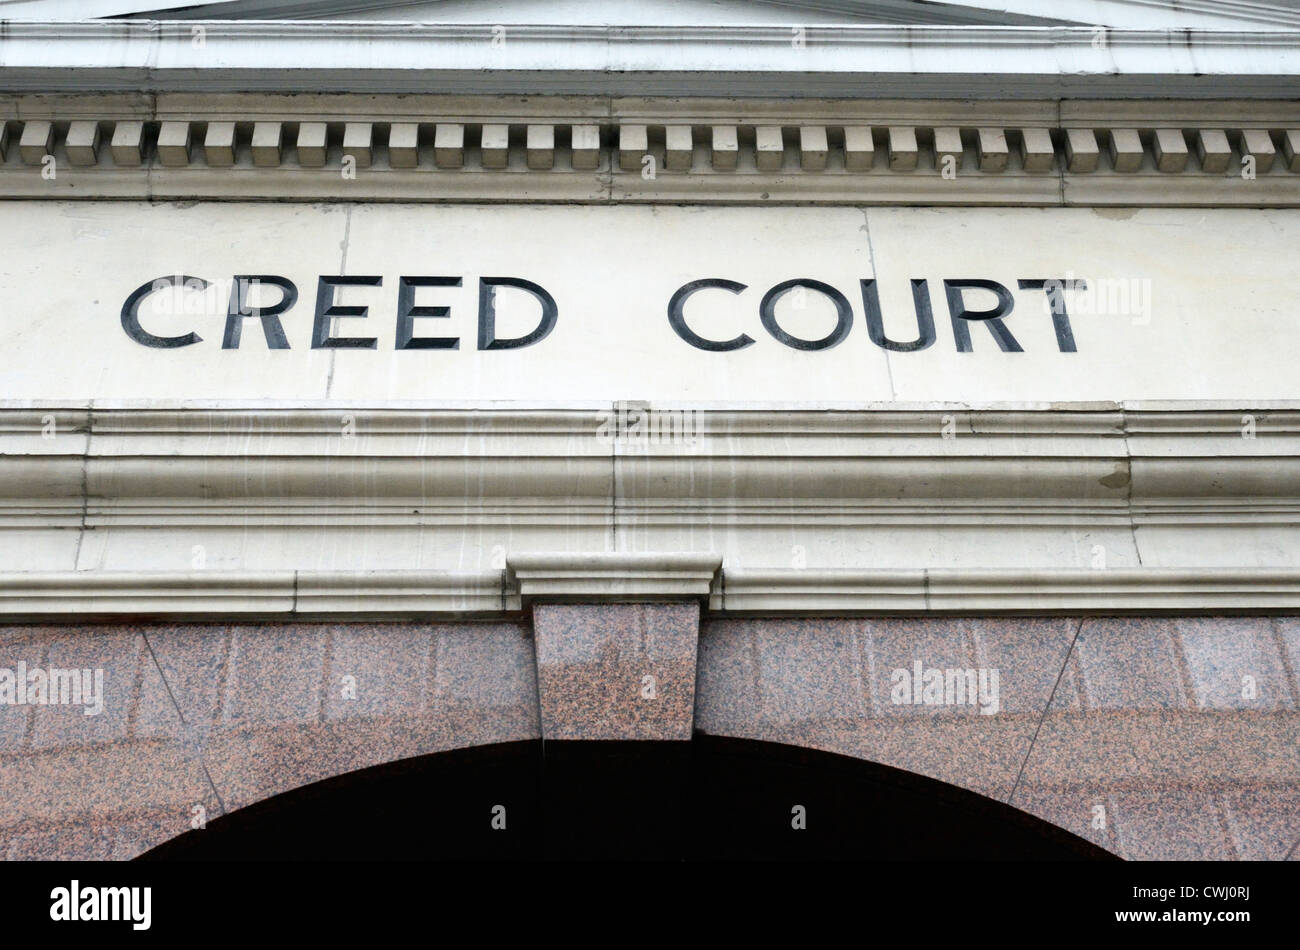 Creed Court sign, Ludgate Hill, London, England Stock Photo